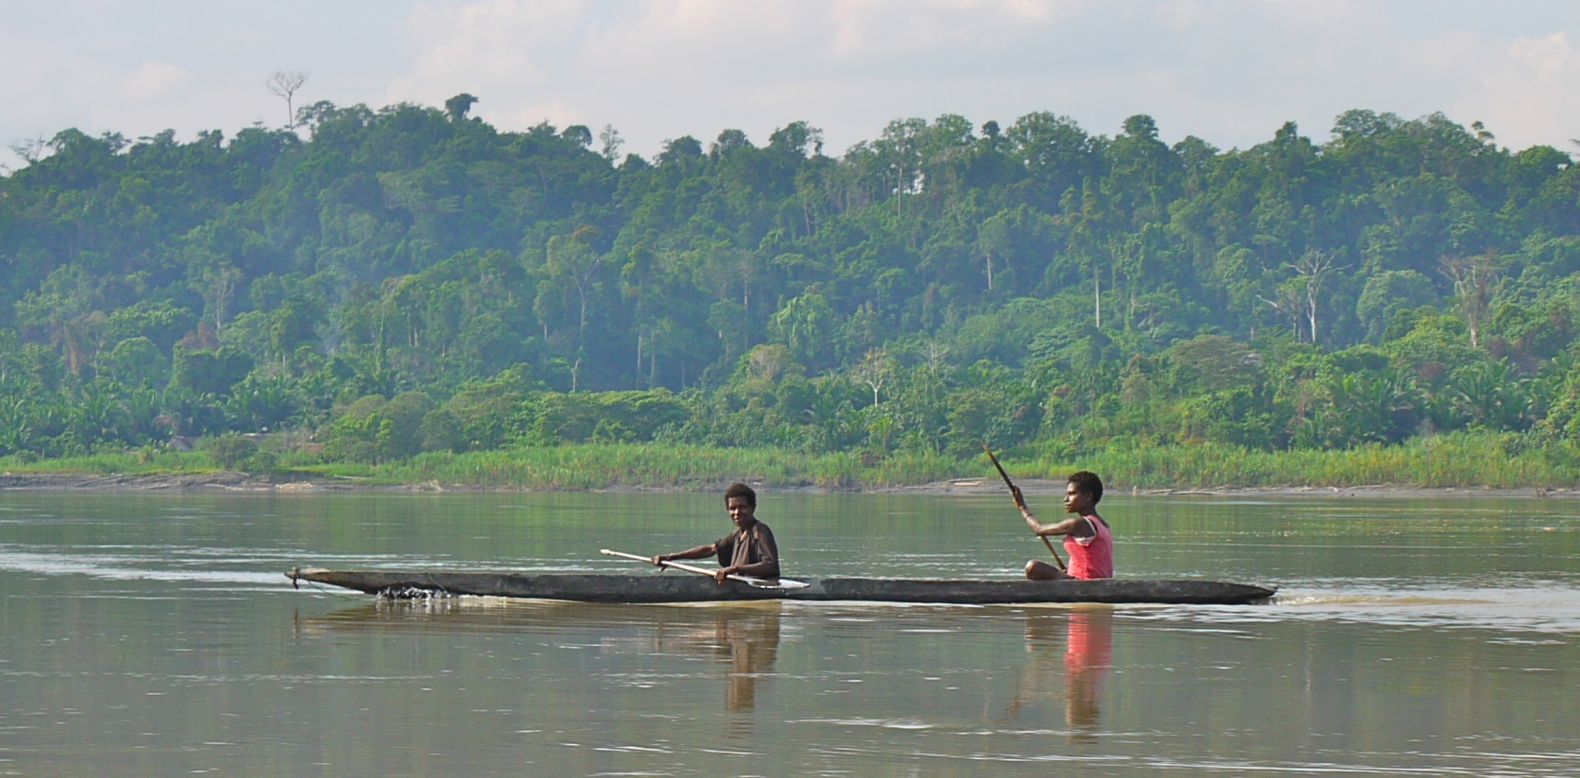 Referred to as the Amazon of the Asia-Pacific, Papua New Guinea's Sepik River is among the world's most diverse ecosystems. Locals travel by dugout canoe through the Sepik's dense rainforests and mangrove swamps.